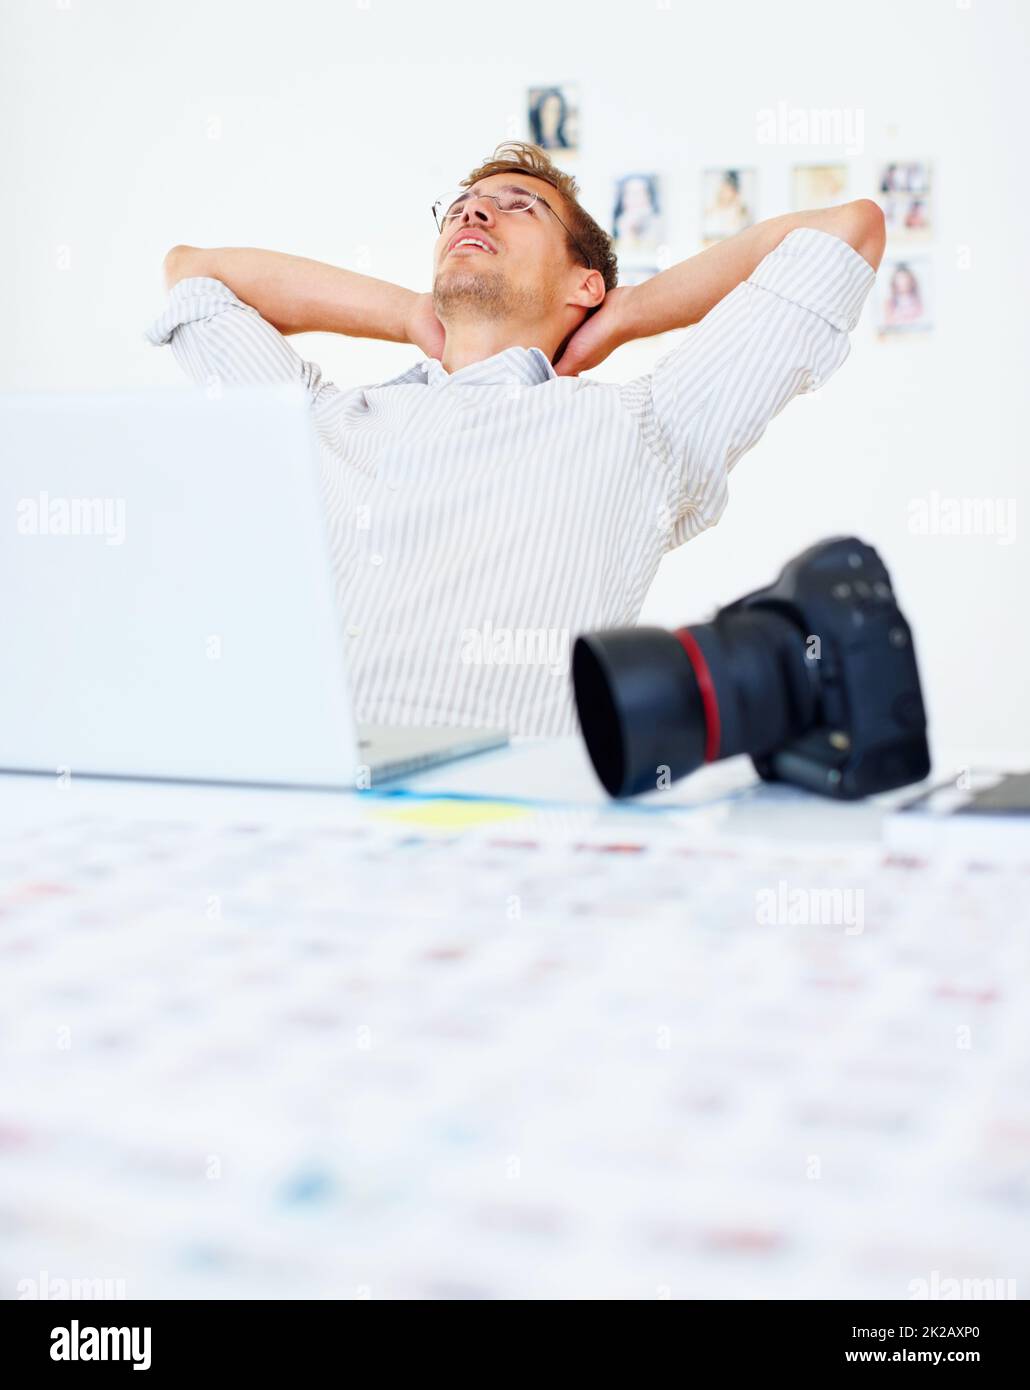 Photographer relaxing. Photographer using laptop and relaxing with hands behind head. Stock Photo